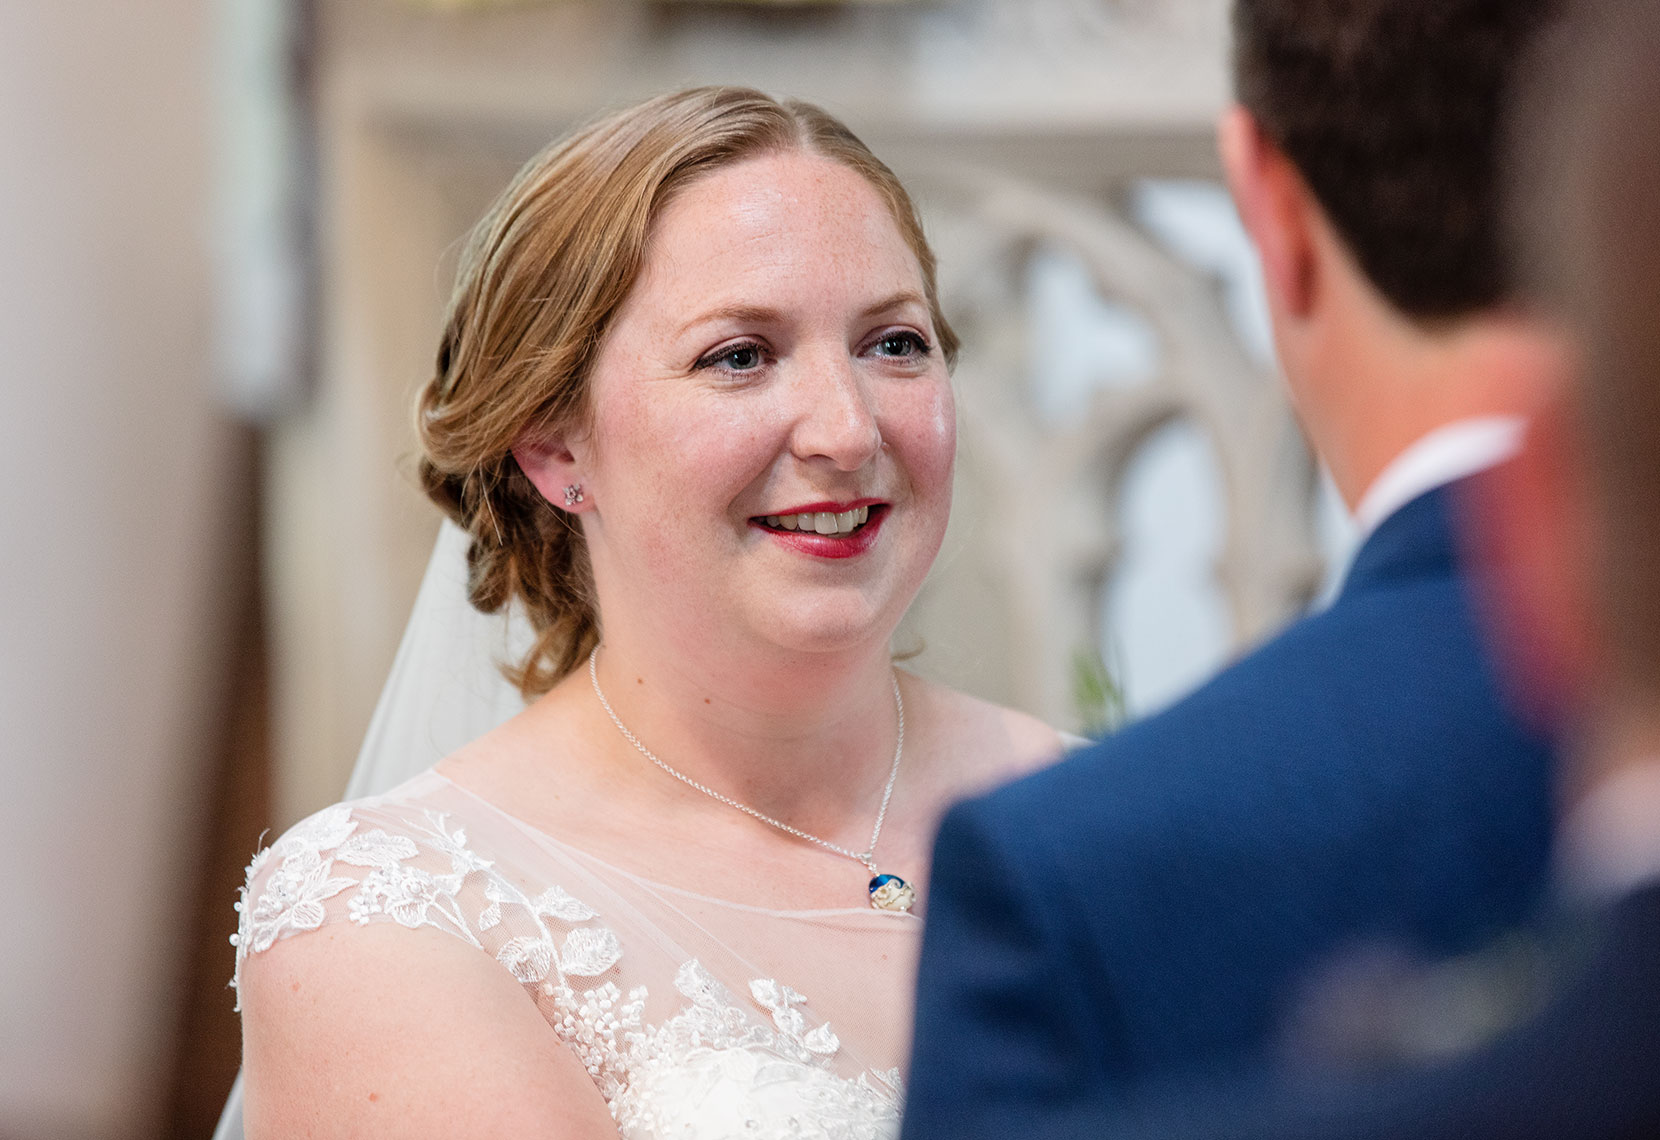 Beautiful smiling bride with red lipstick making eye contact with the groom